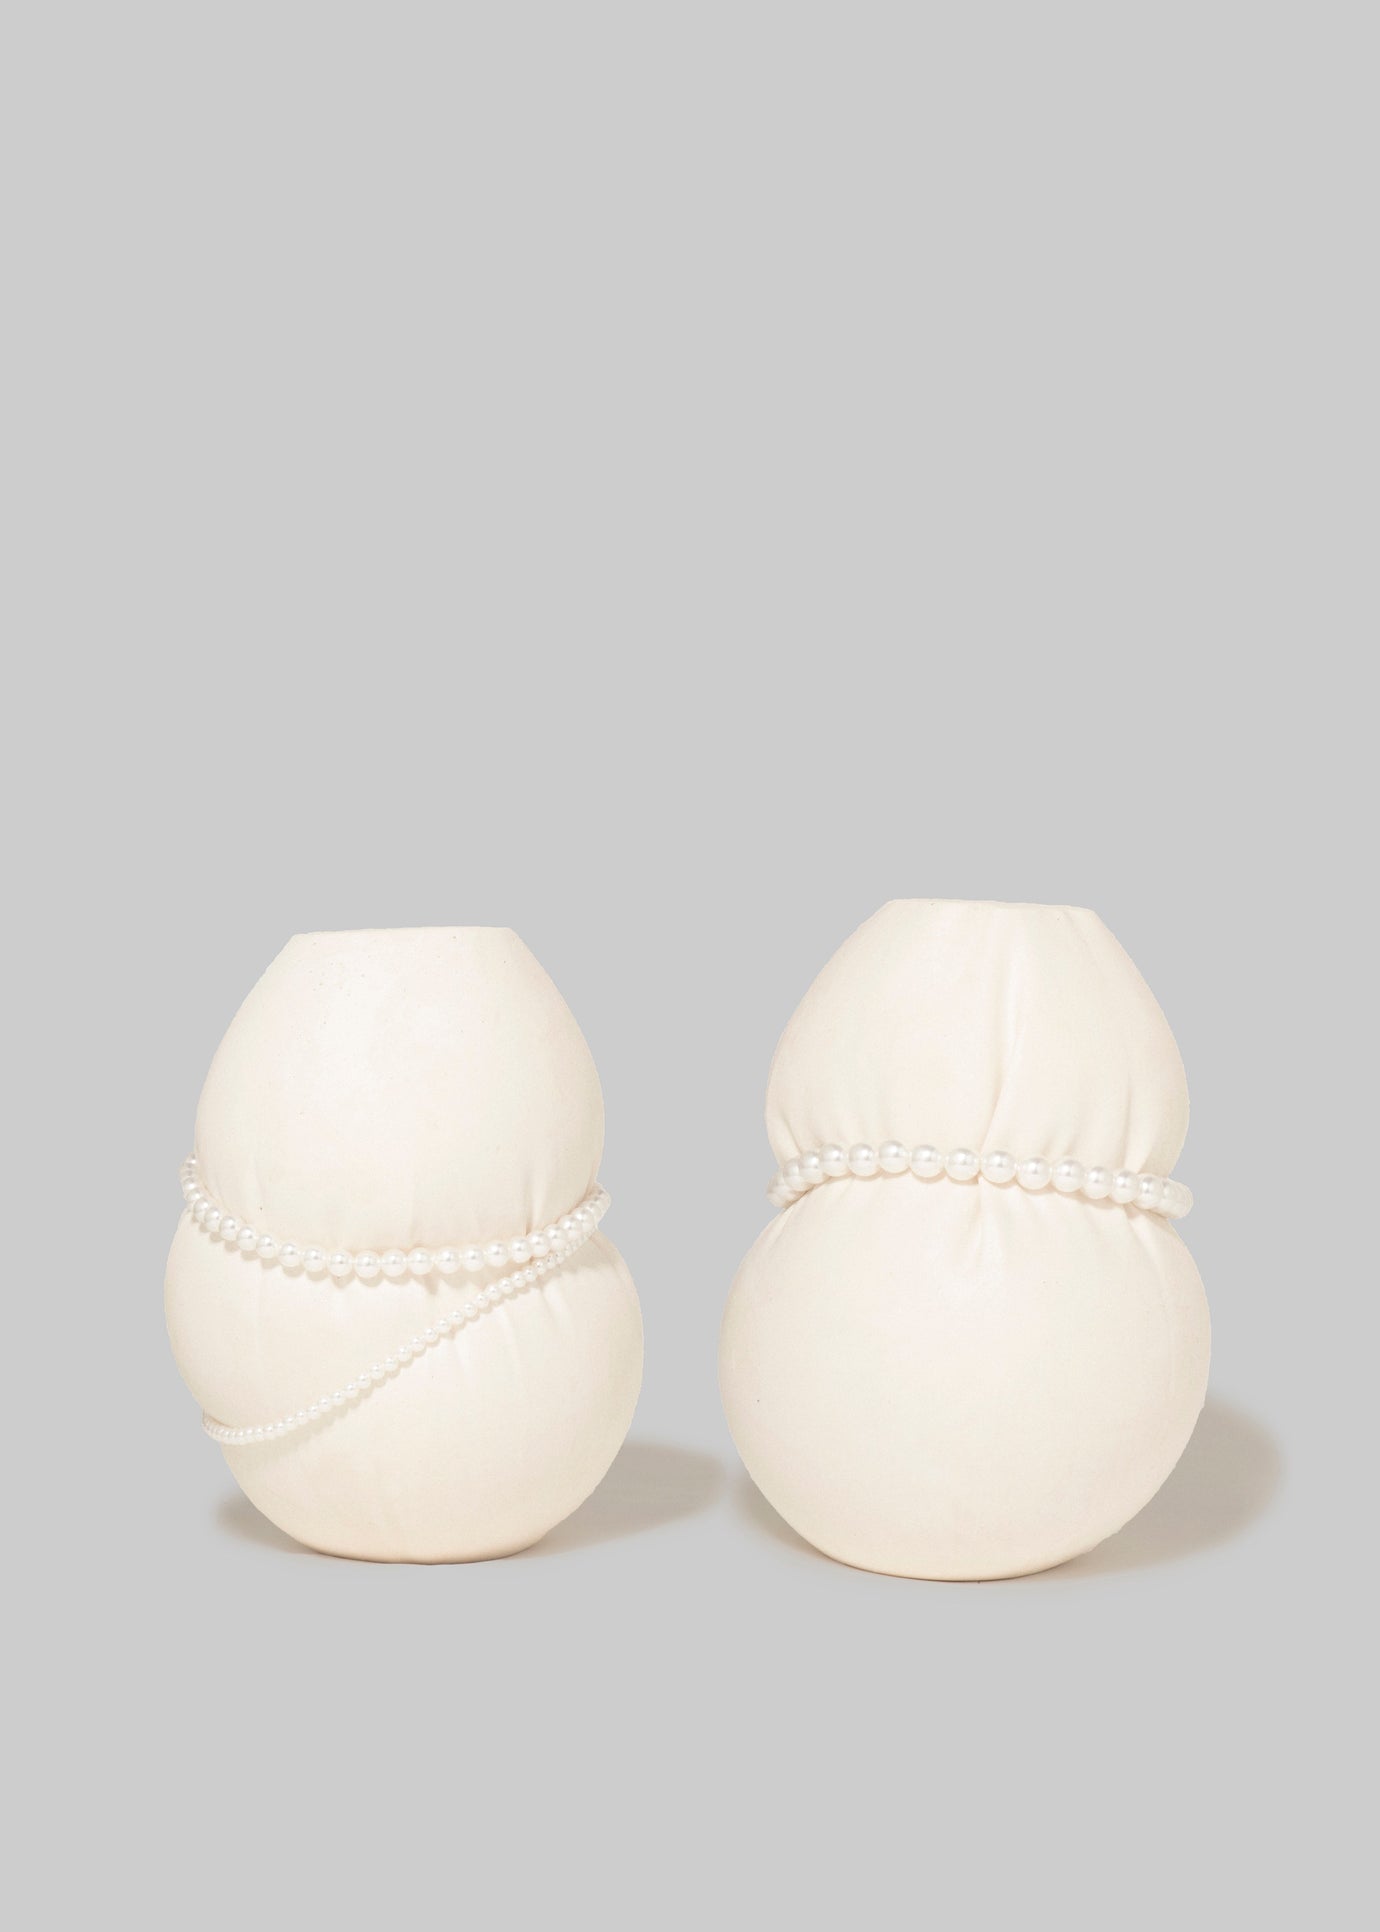 Completedworks B32 Set of Two Small Vessels - Matte White